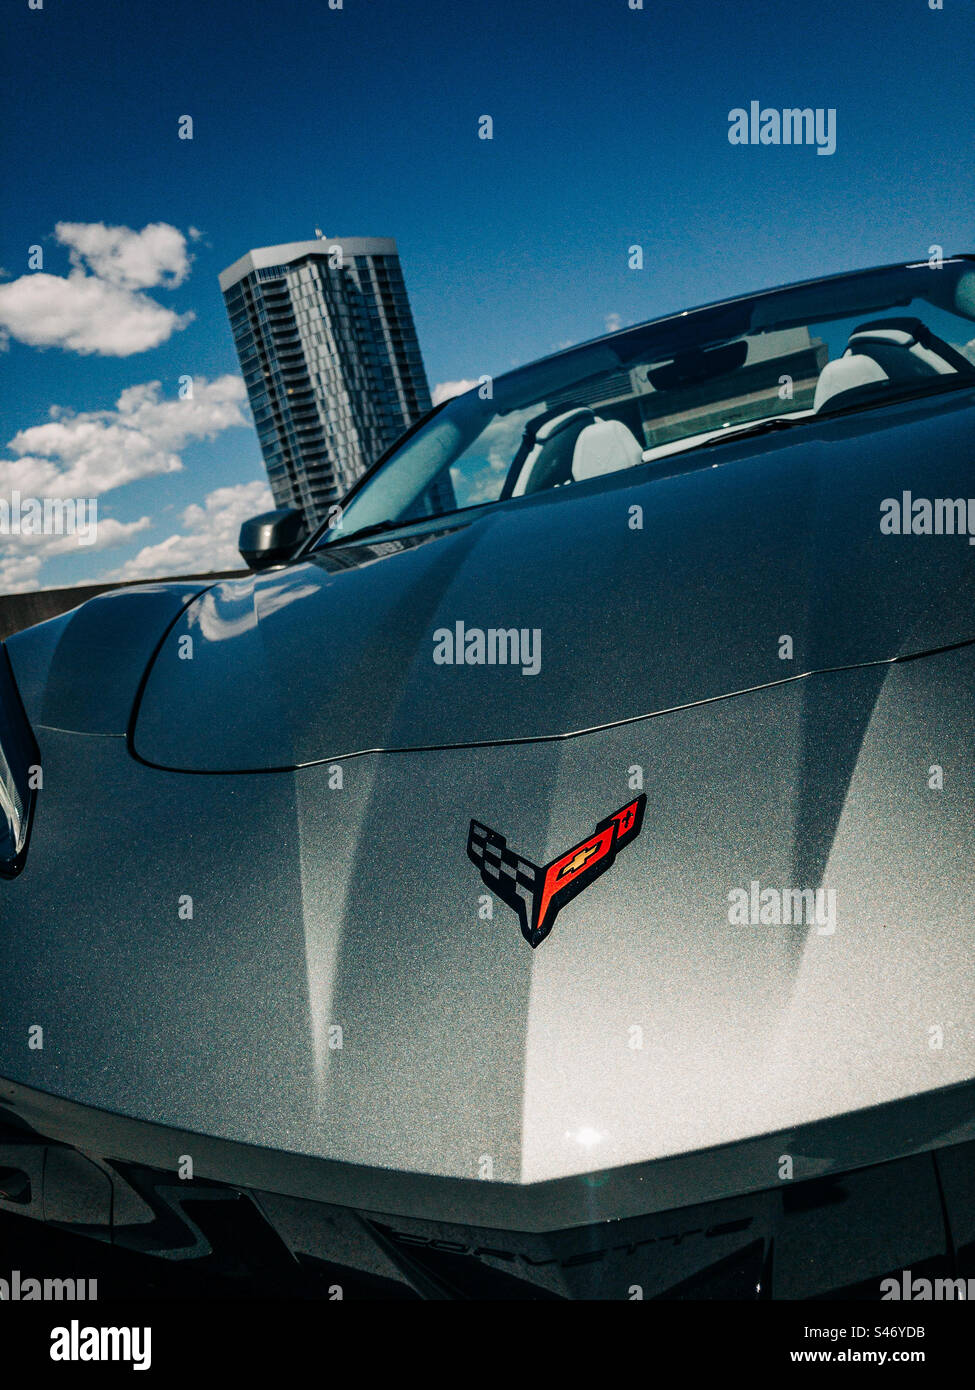 Close-up photo of the logo on a silver 2023 Chevrolet Corvette Stingray, 70th Anniversary Edition, sitting on the top floor of a parking garage in Denver, CO, with buildings, sky, and clouds. Stock Photo